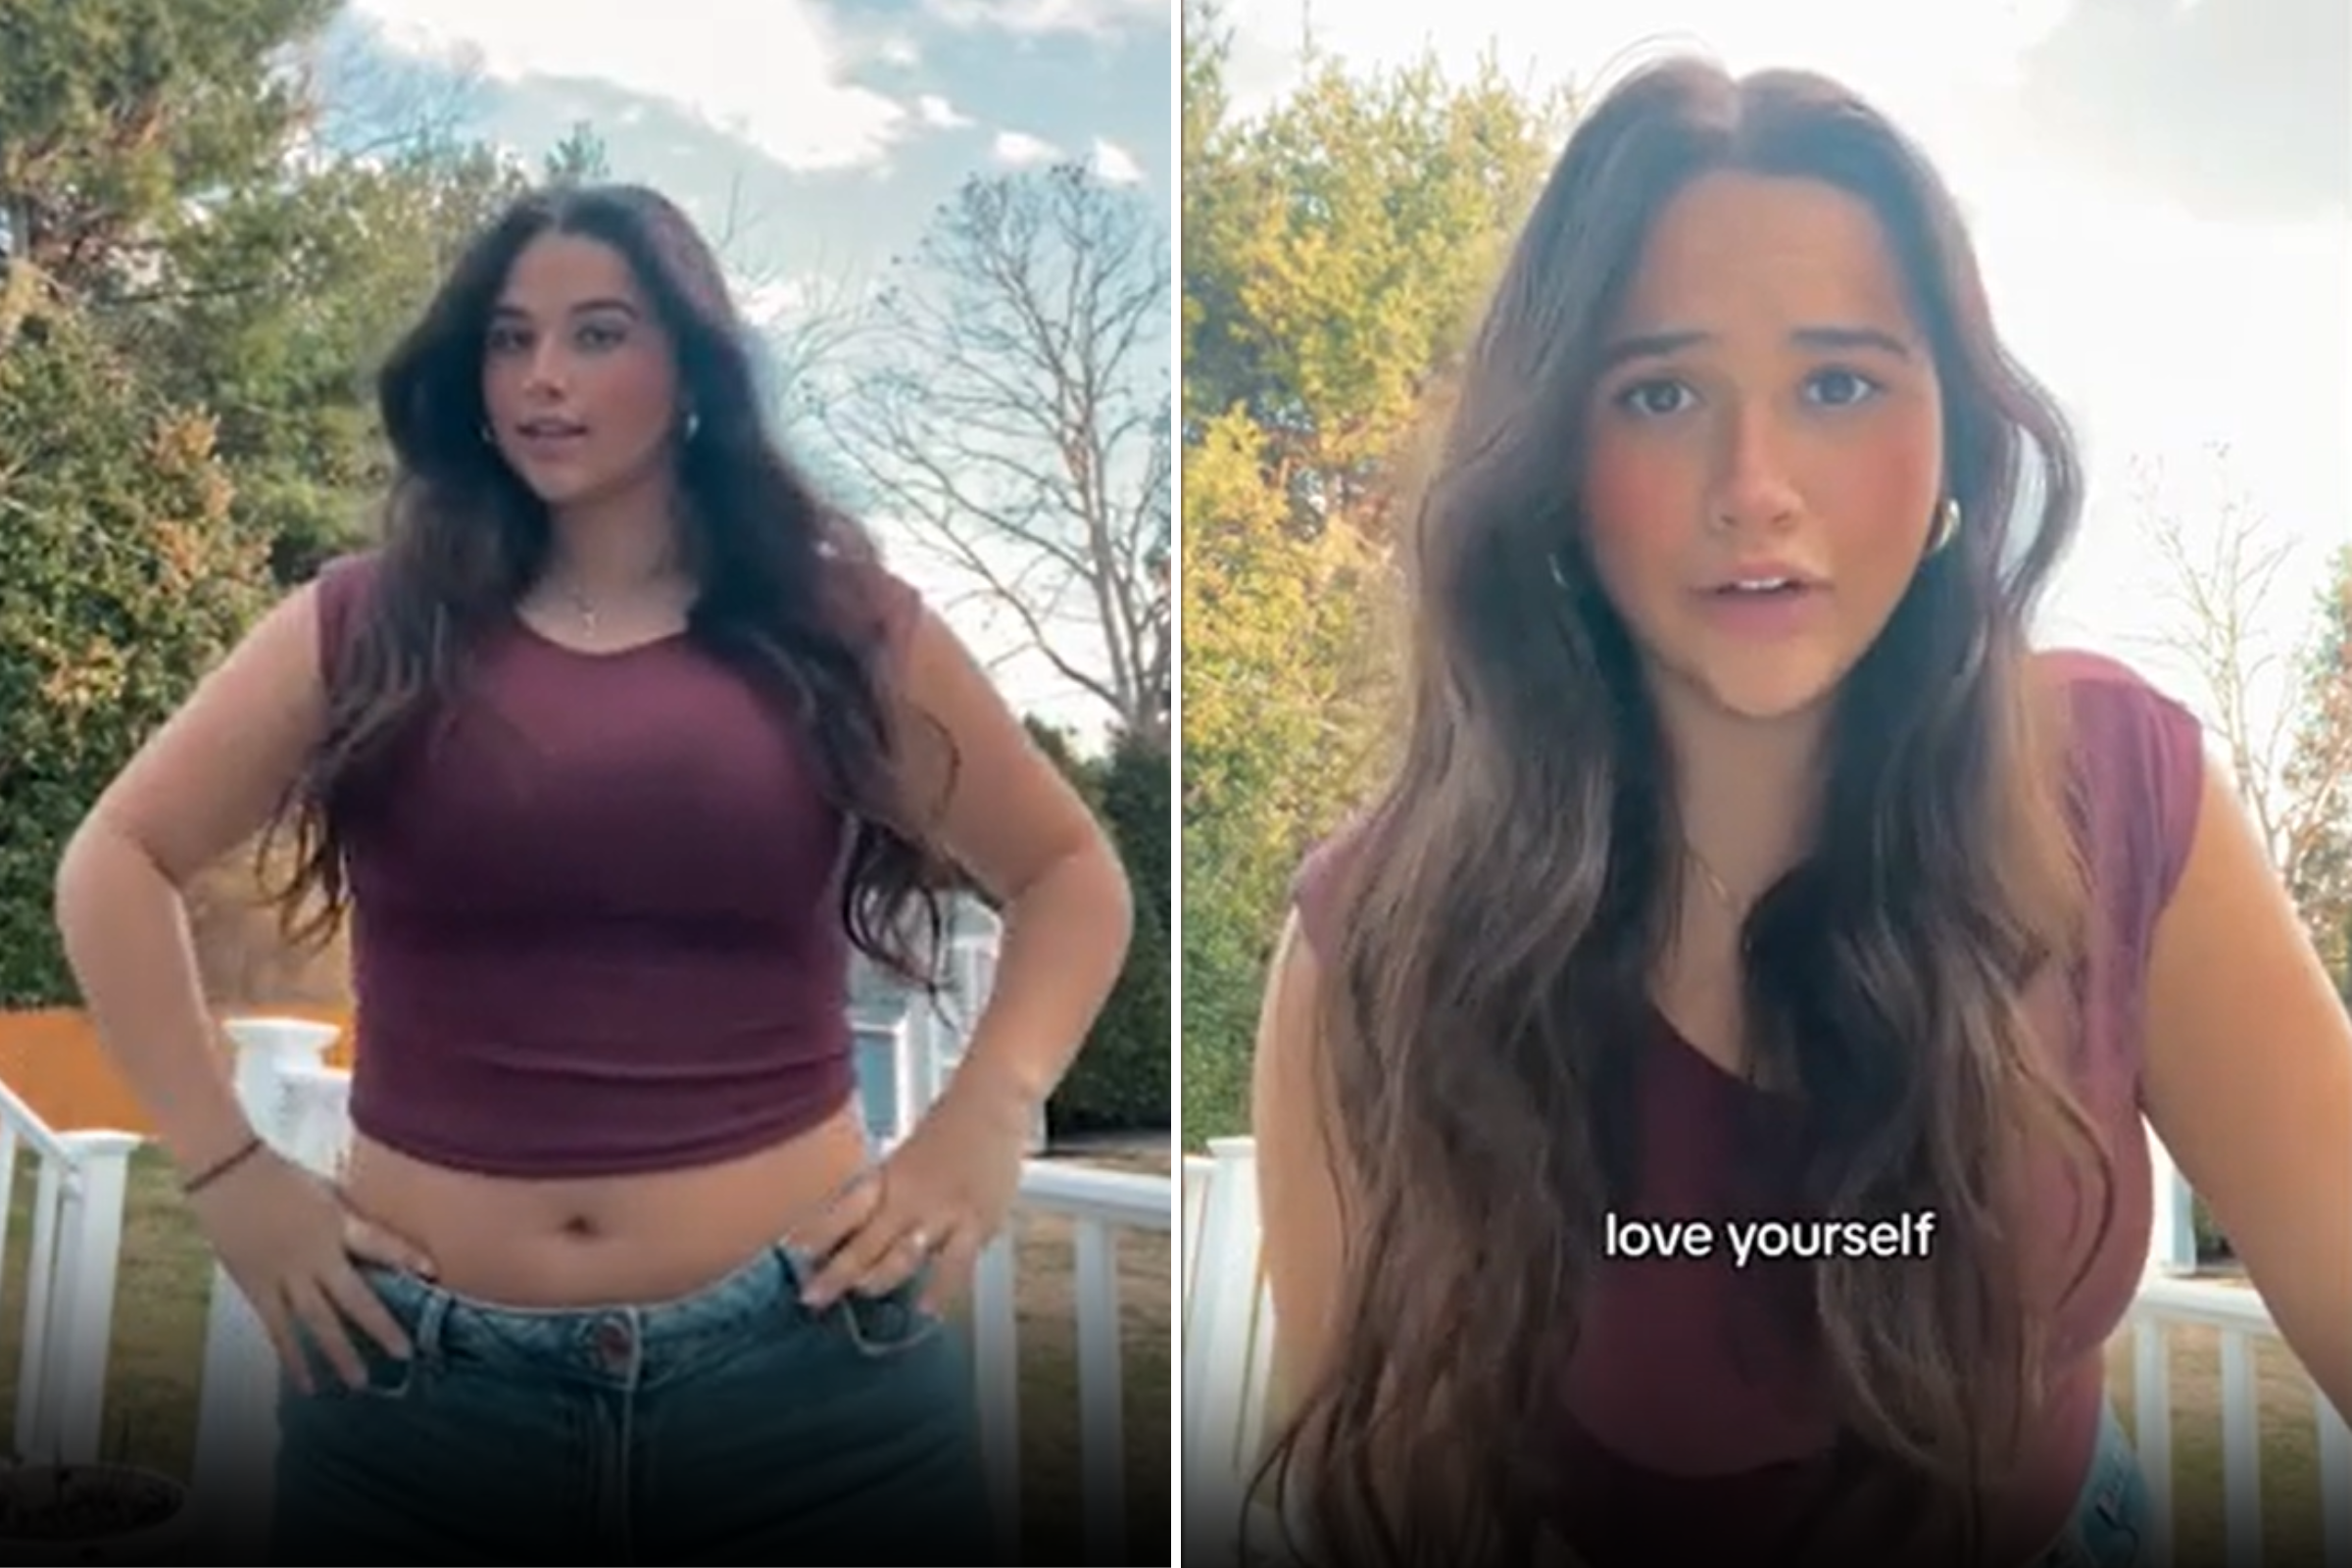 Woman shares her “biggest insecurity” to help others overcome theirs